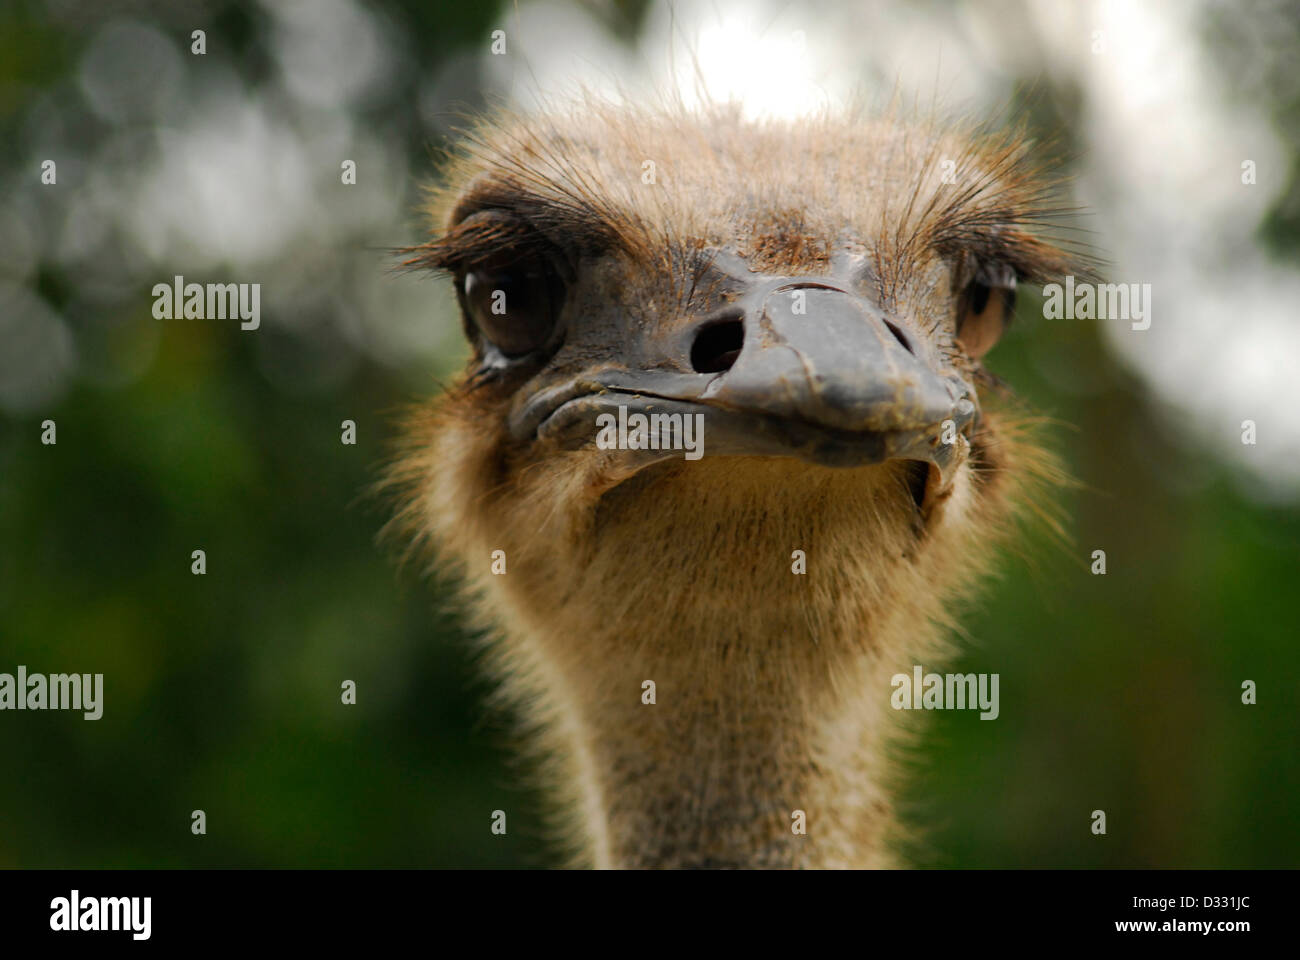 Close up detail of the head of an ostrich Stock Photo